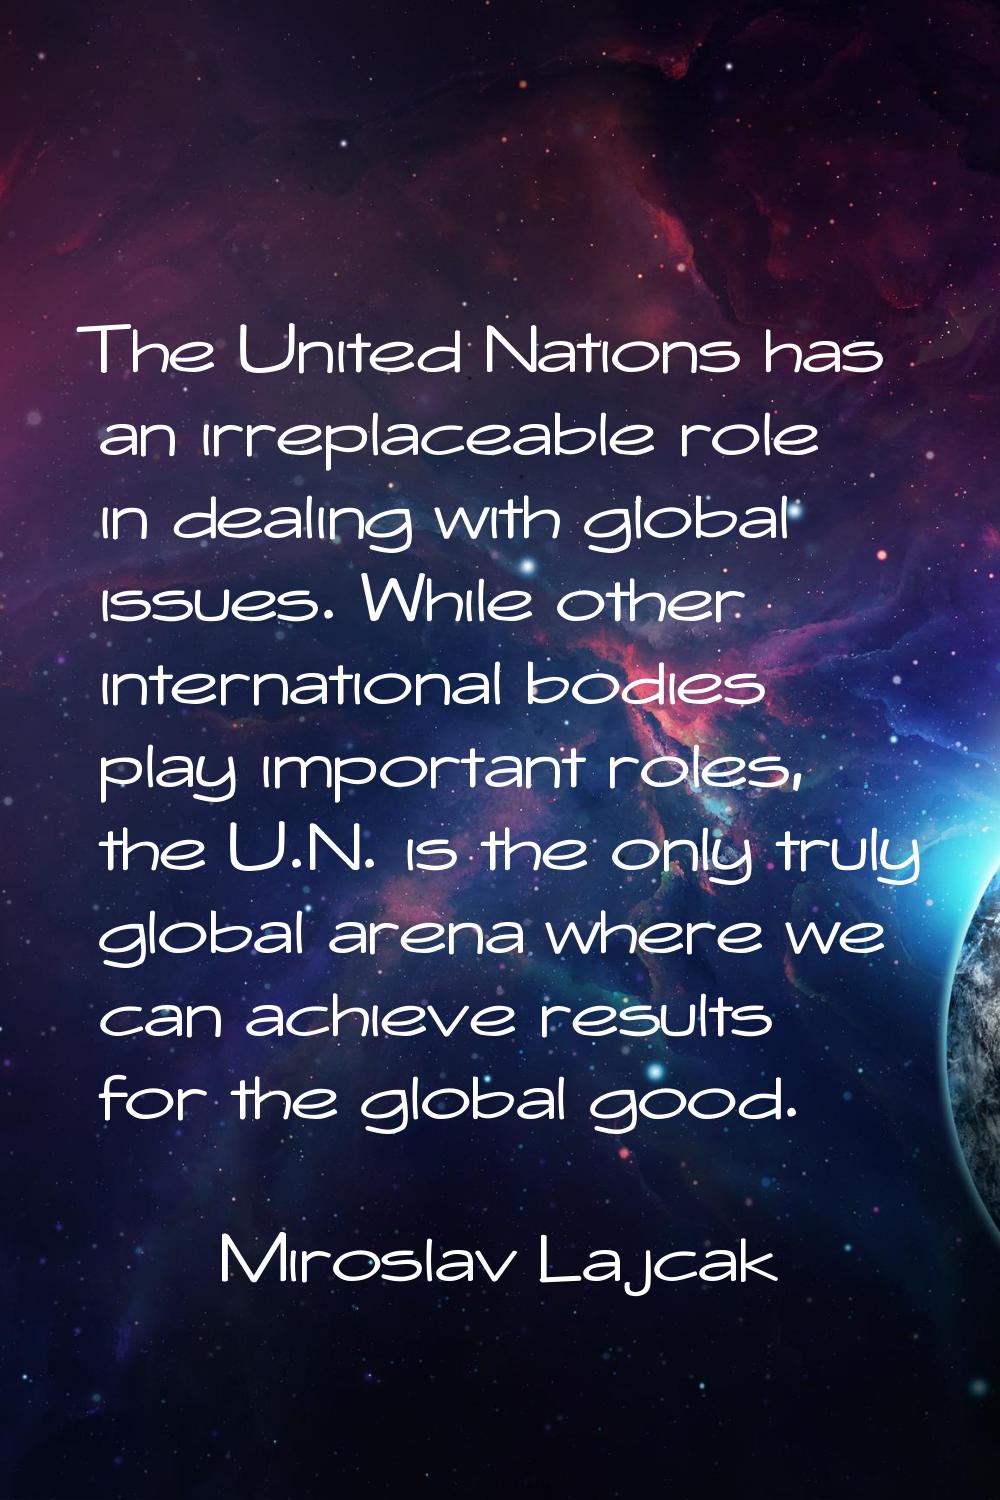 The United Nations has an irreplaceable role in dealing with global issues. While other internation